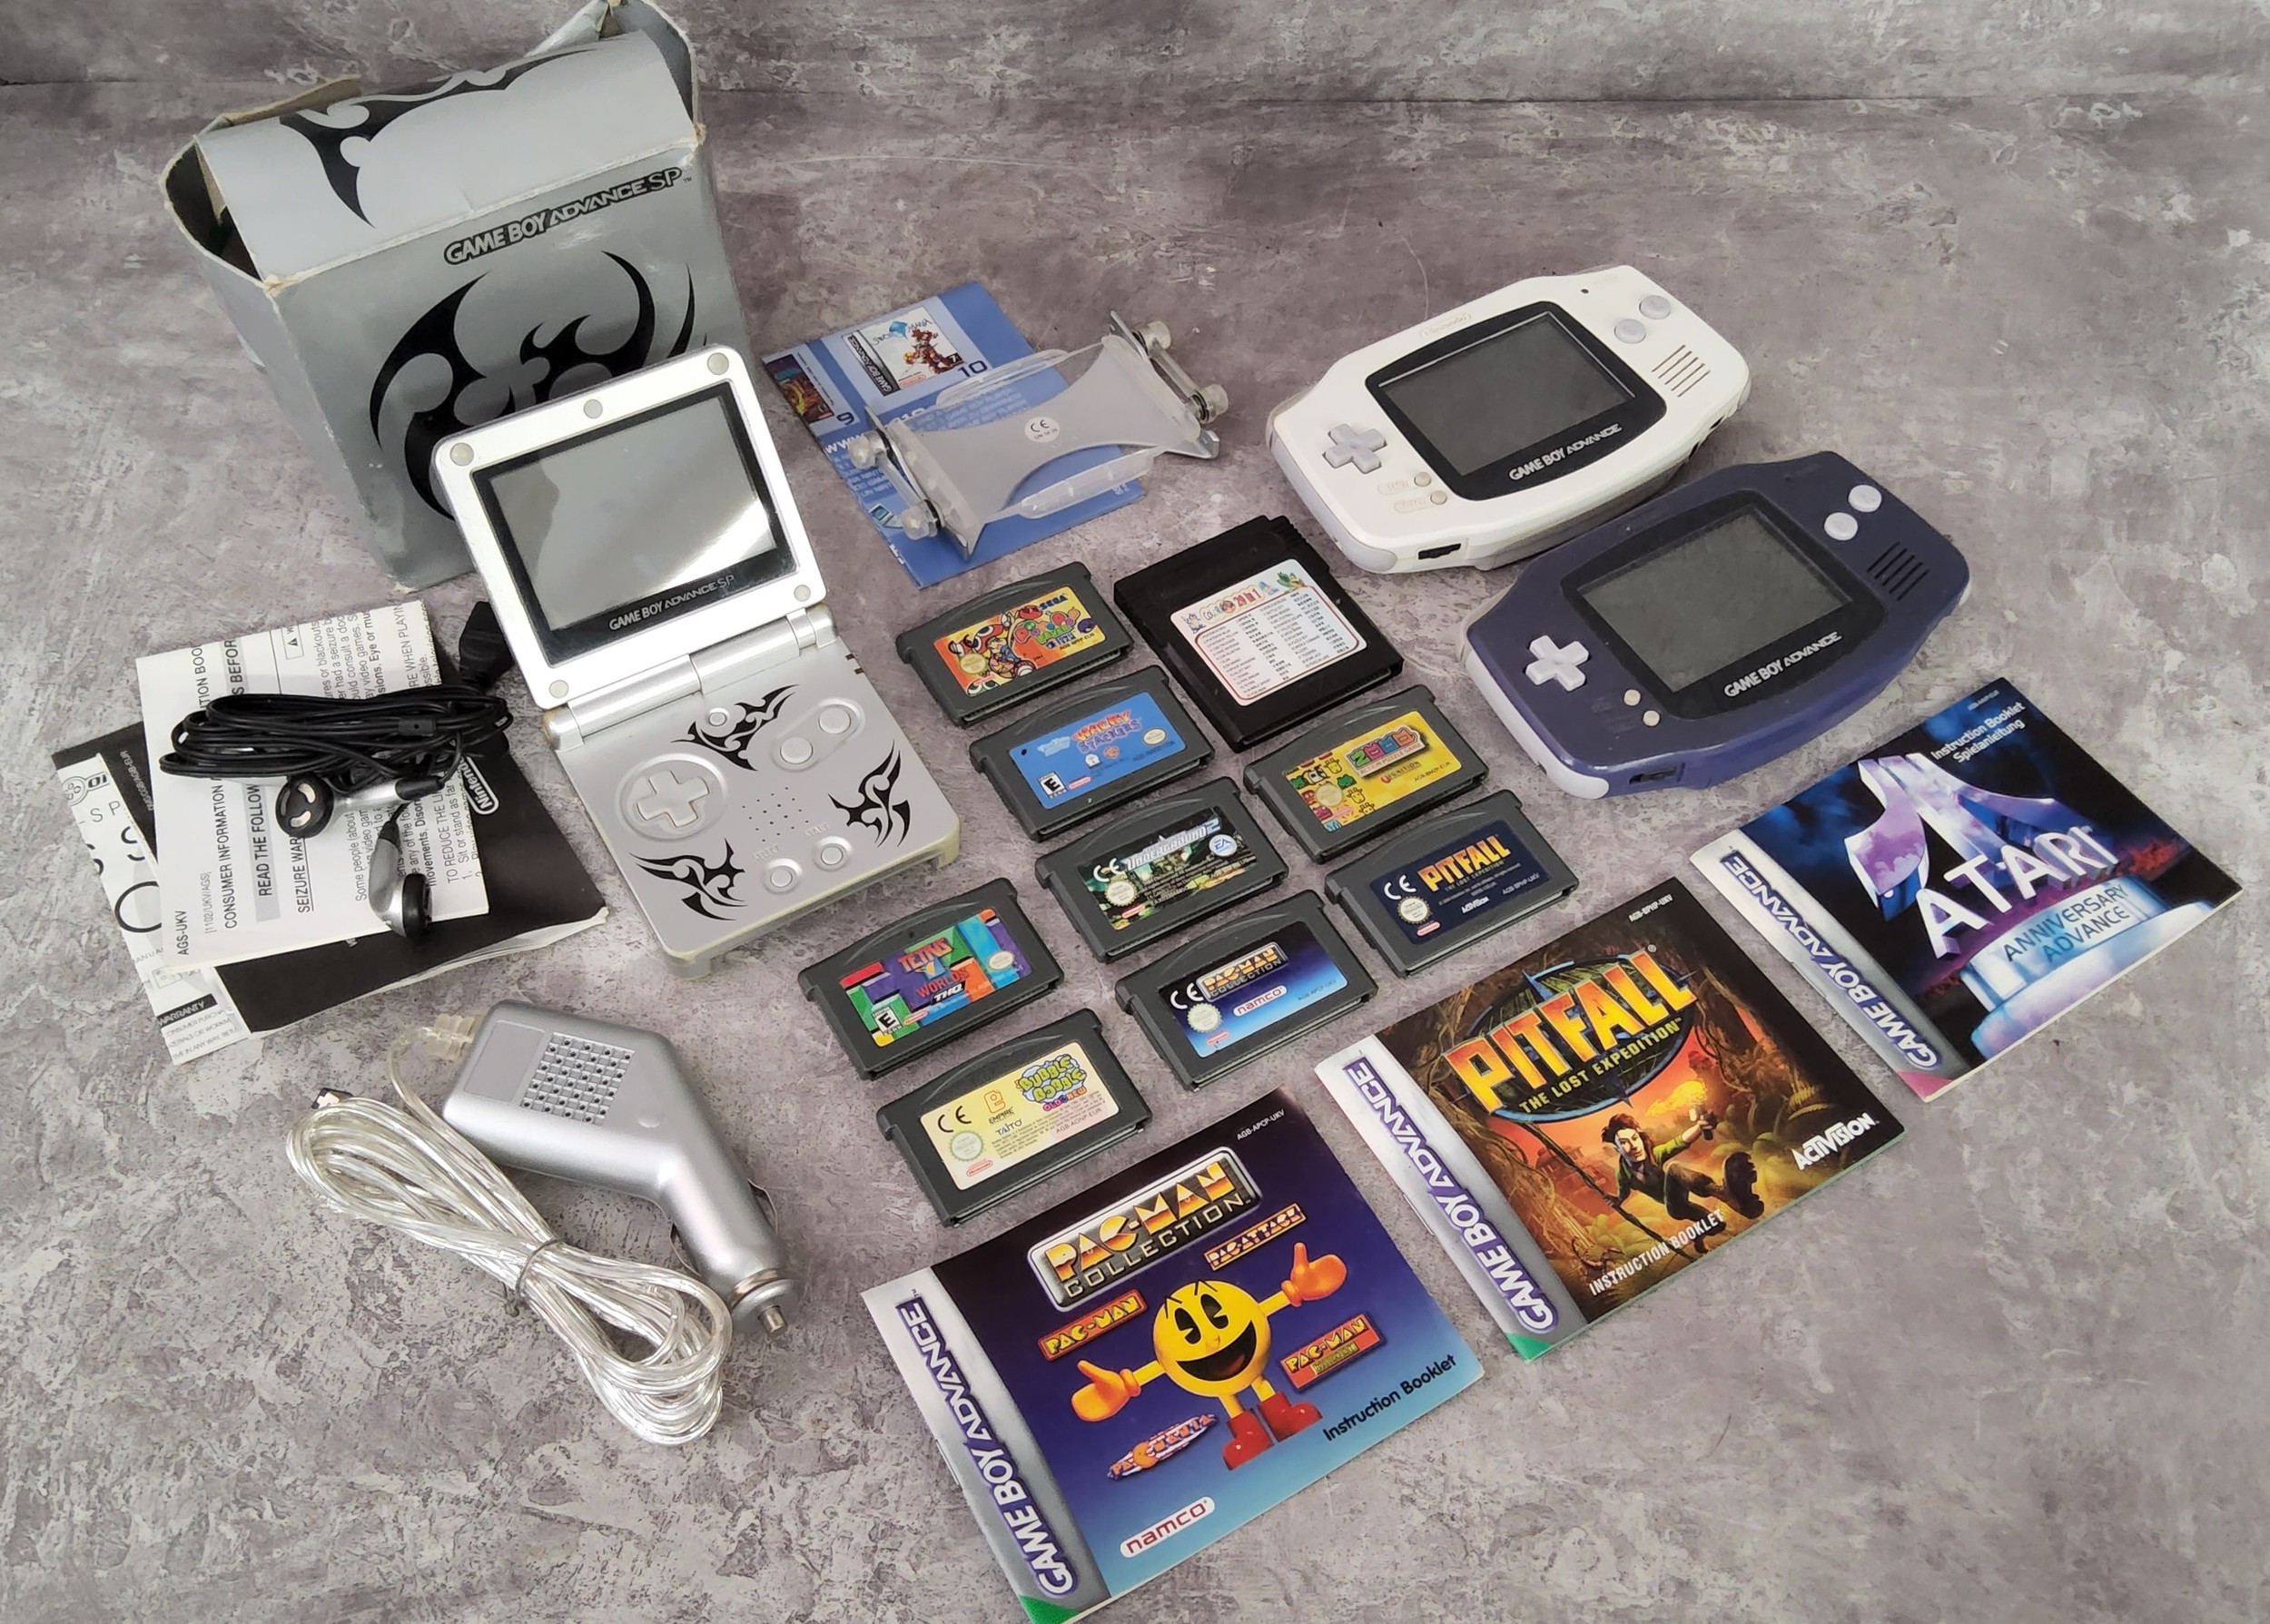 Game Boy Advance SP AGS-001 Console, Limited  Tribal Edition, Silver, original box; various games